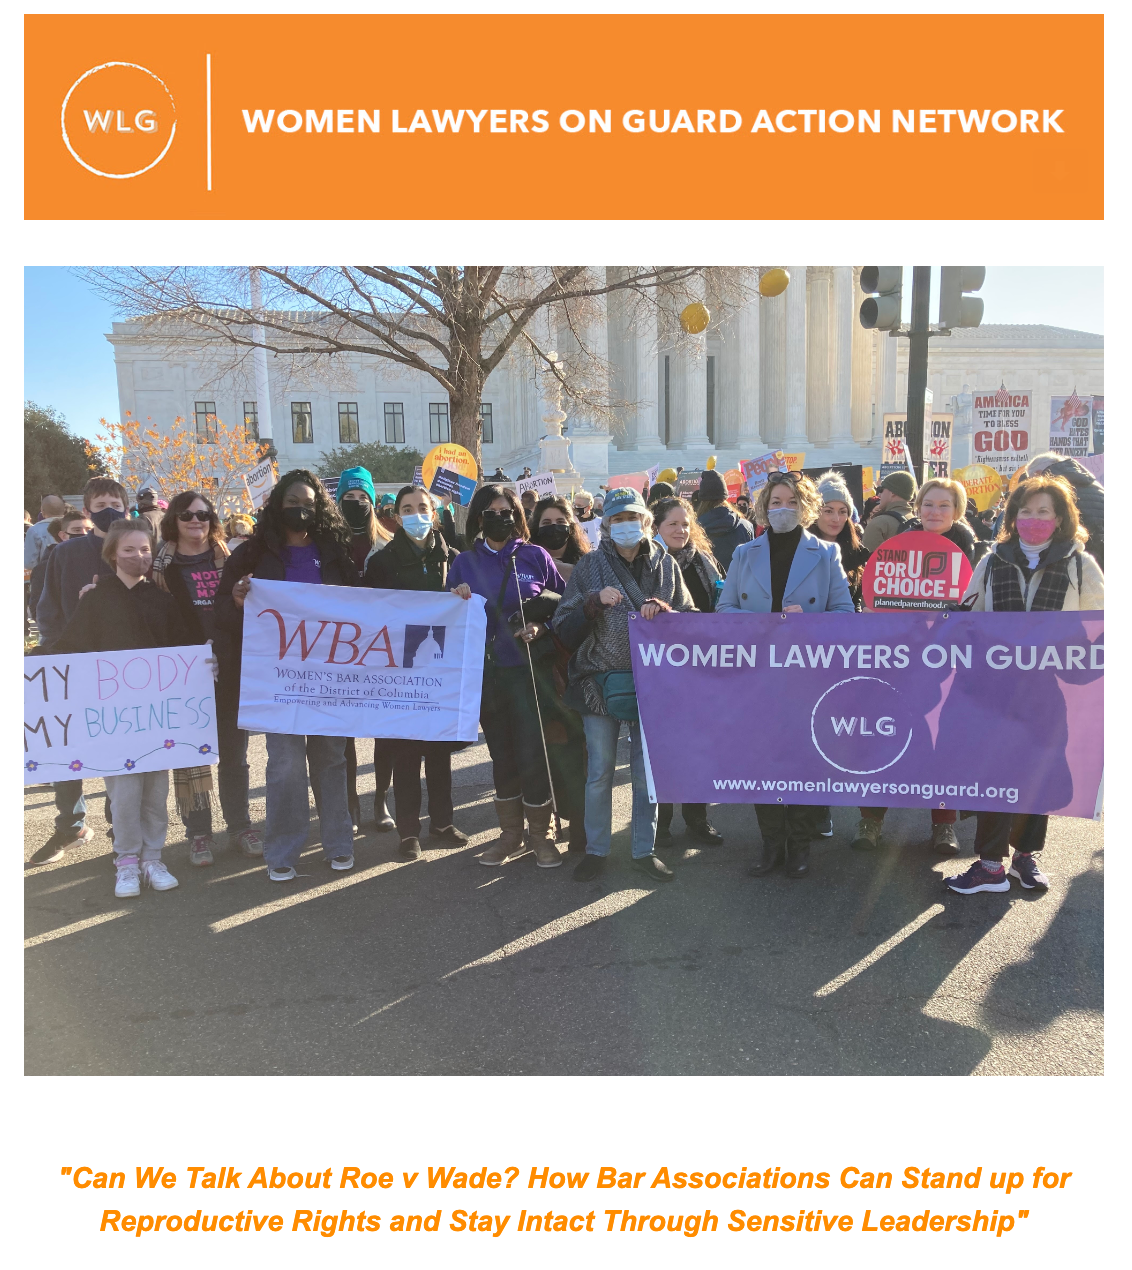 Women Lawyers on Guard ACTION NETWORK